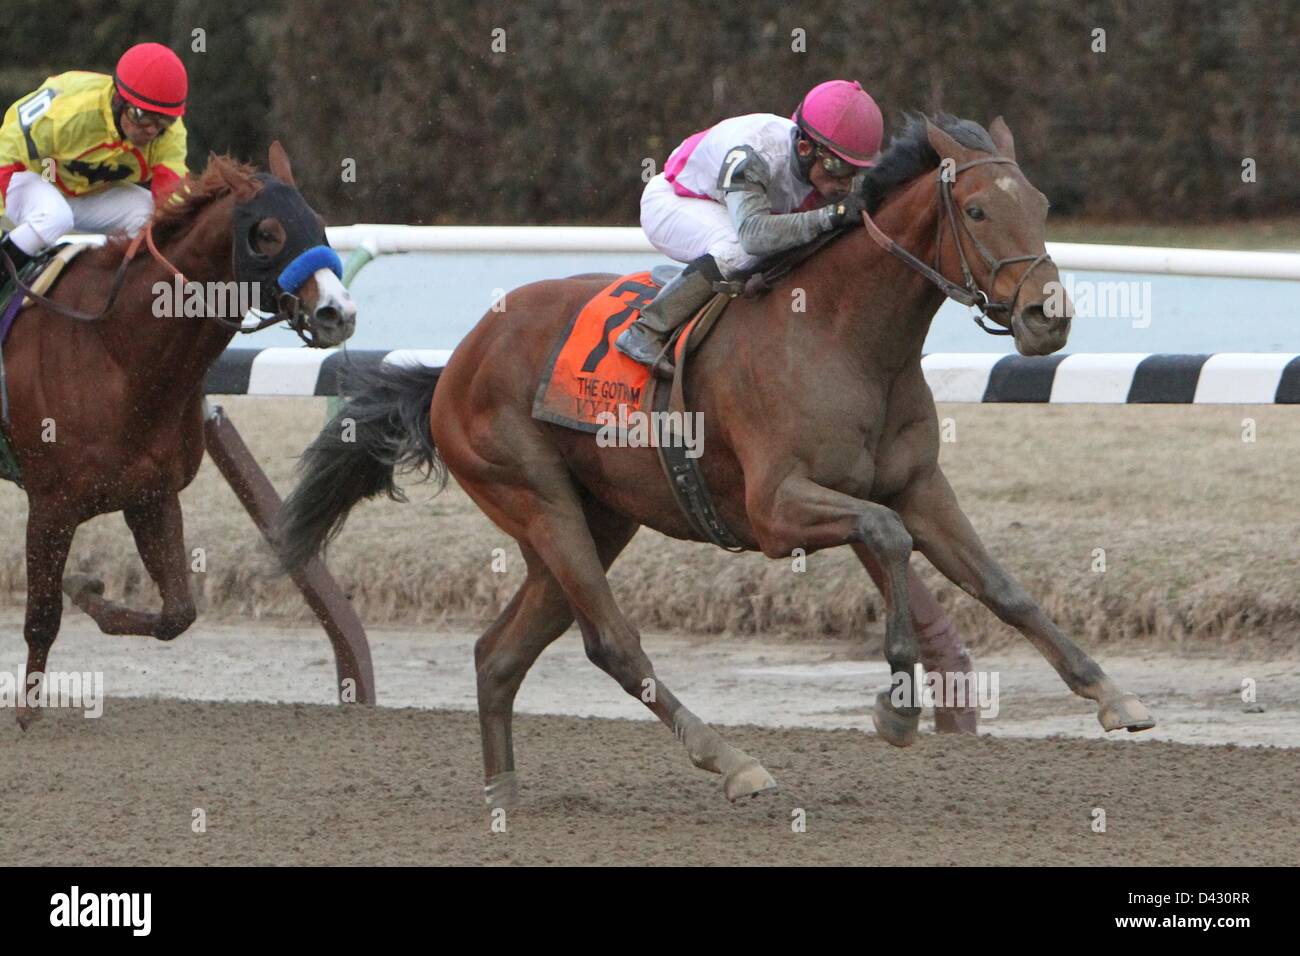 March 2, 2013 - Jamaica, New York, U.S. - Vyjack with Joel Rosaria win the Grade III Gotham for 3-year olds, going 1 1/16 mile, on the inner dirt at Aqueduct.  Trainer Rudy Rodriguez.  Owner Pix Six Racing (Credit Image: © Sue Kawczynski/Eclipse/ZUMAPRESS.com) Stock Photo